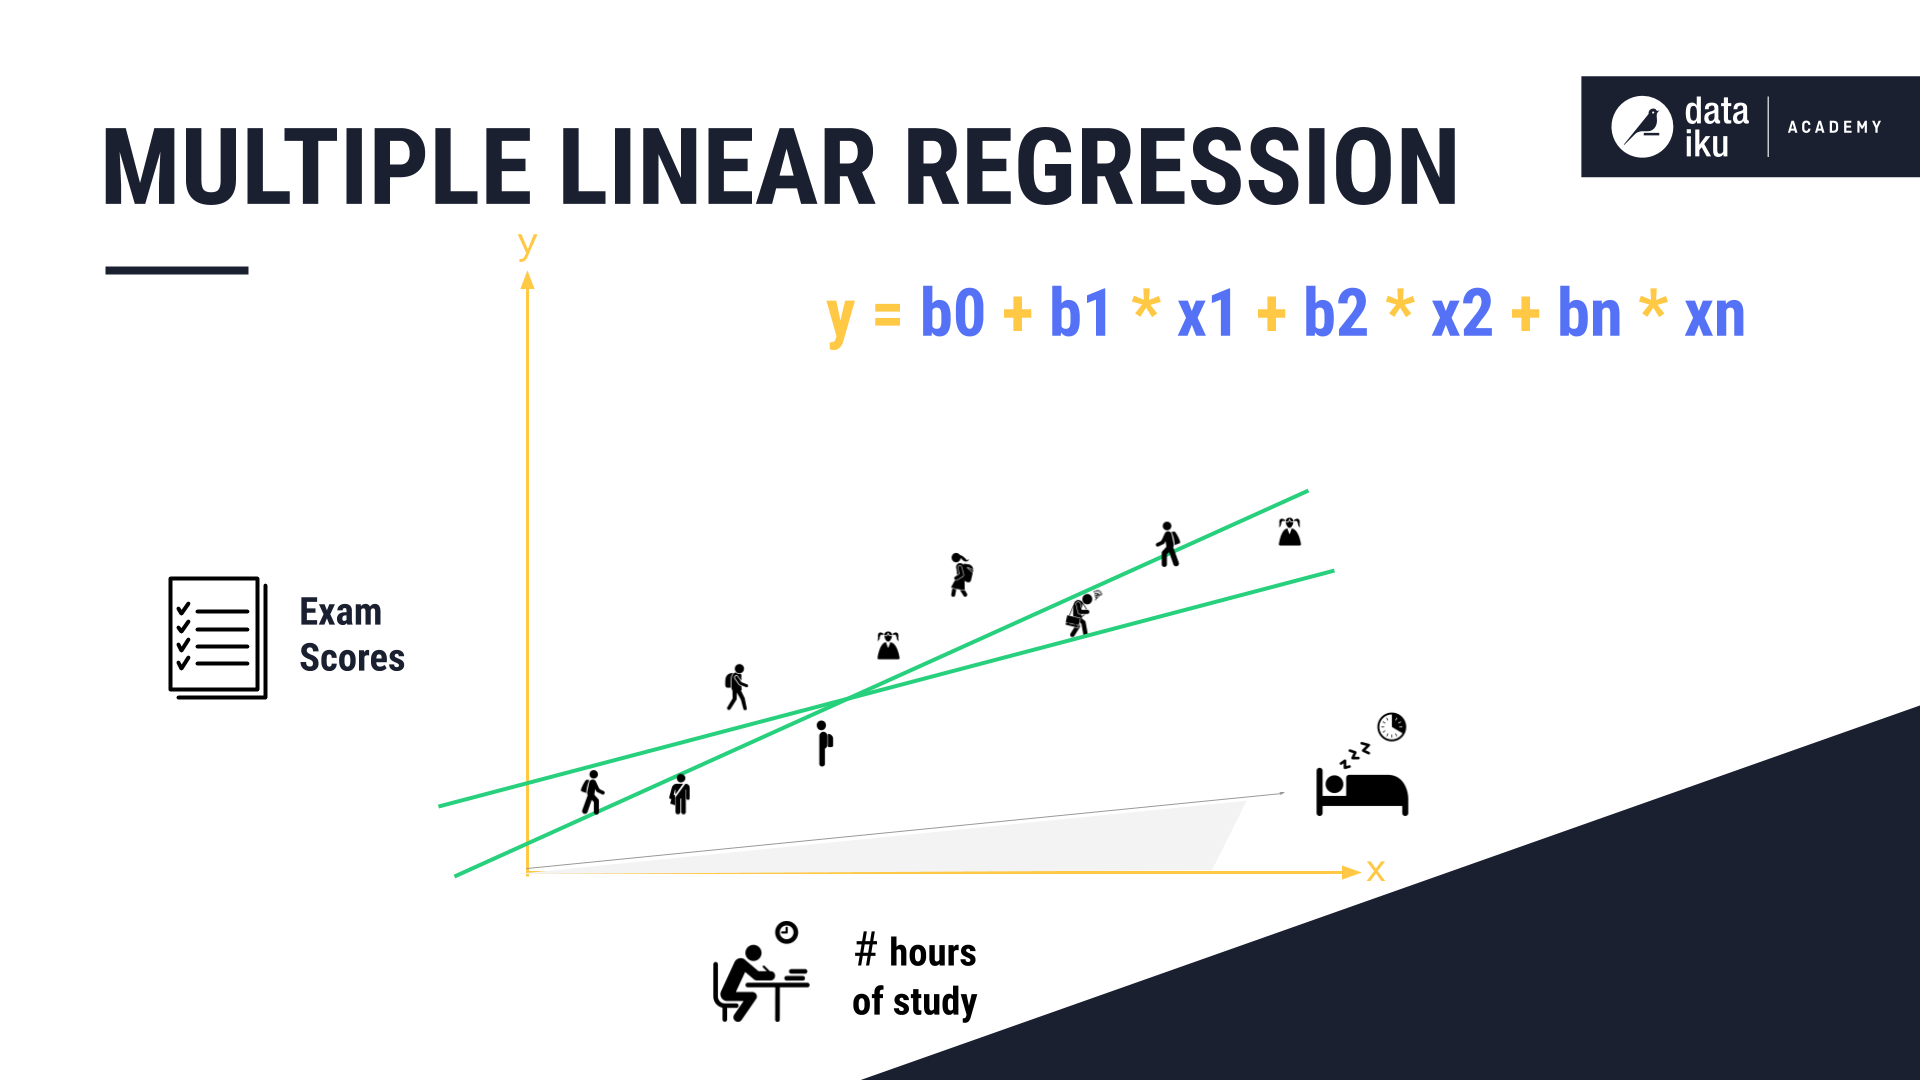 ../../_images/multiple-linear-regression2.png